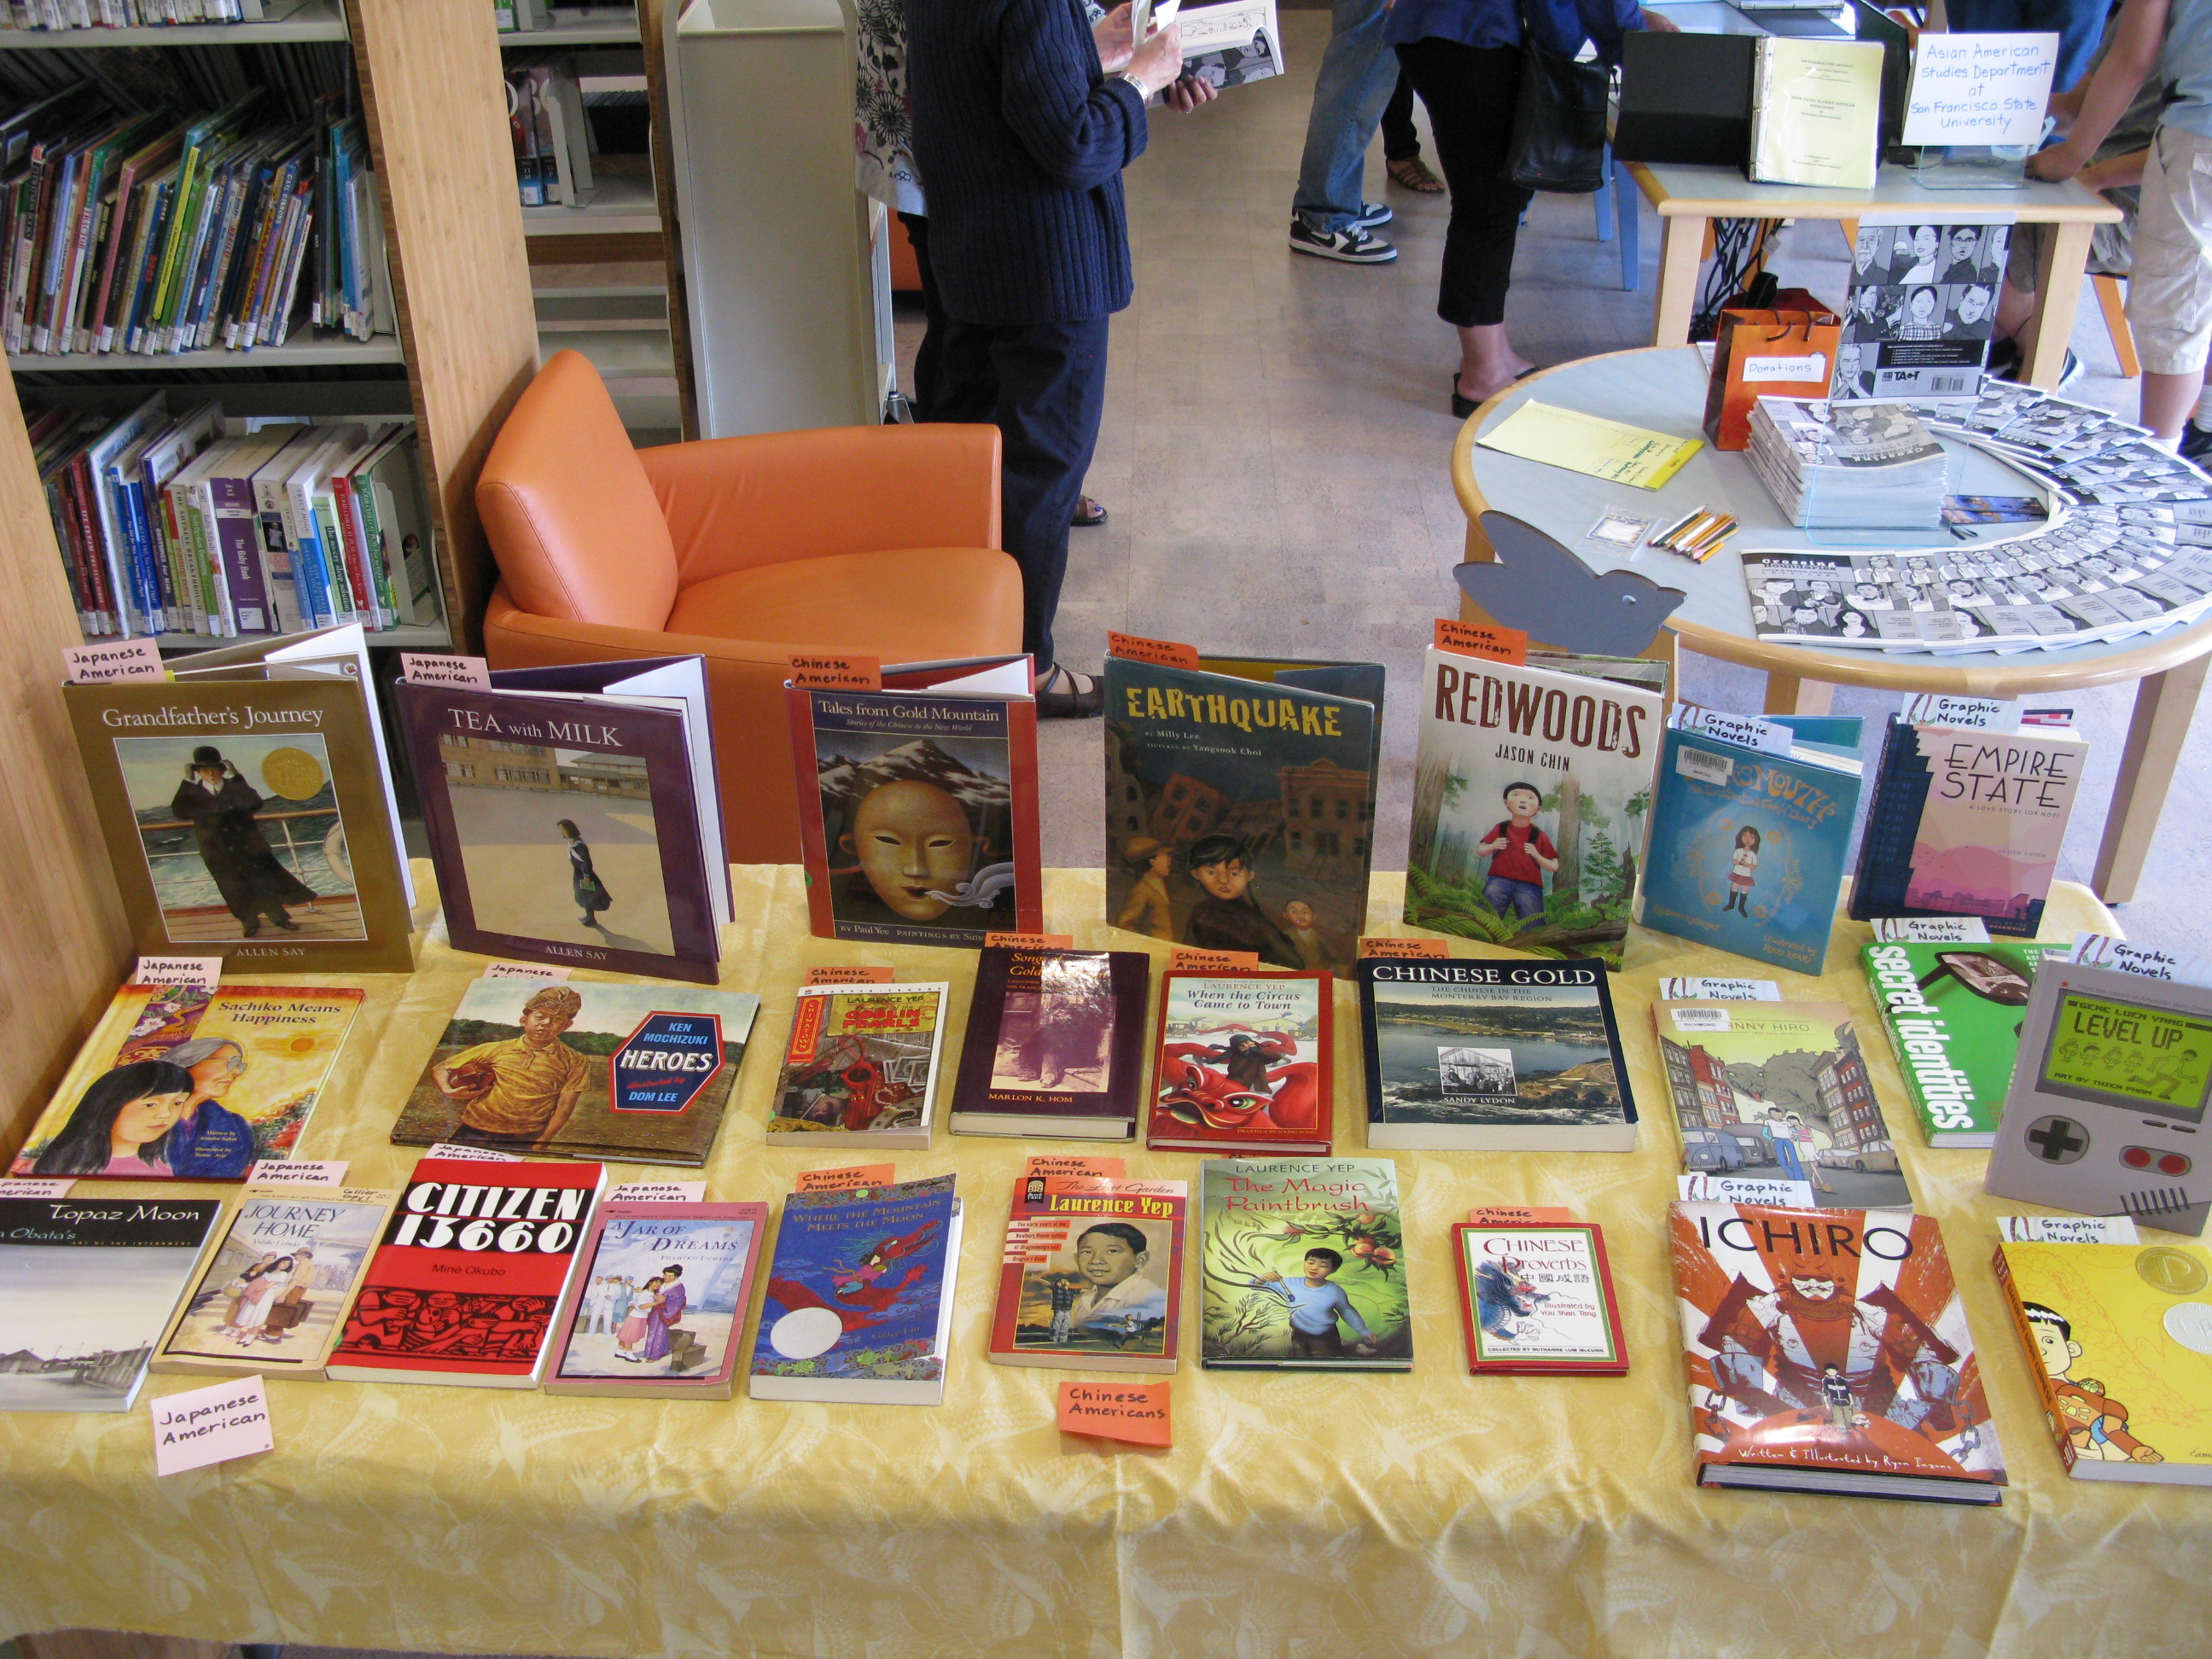 Books standing and laid out on a table for display